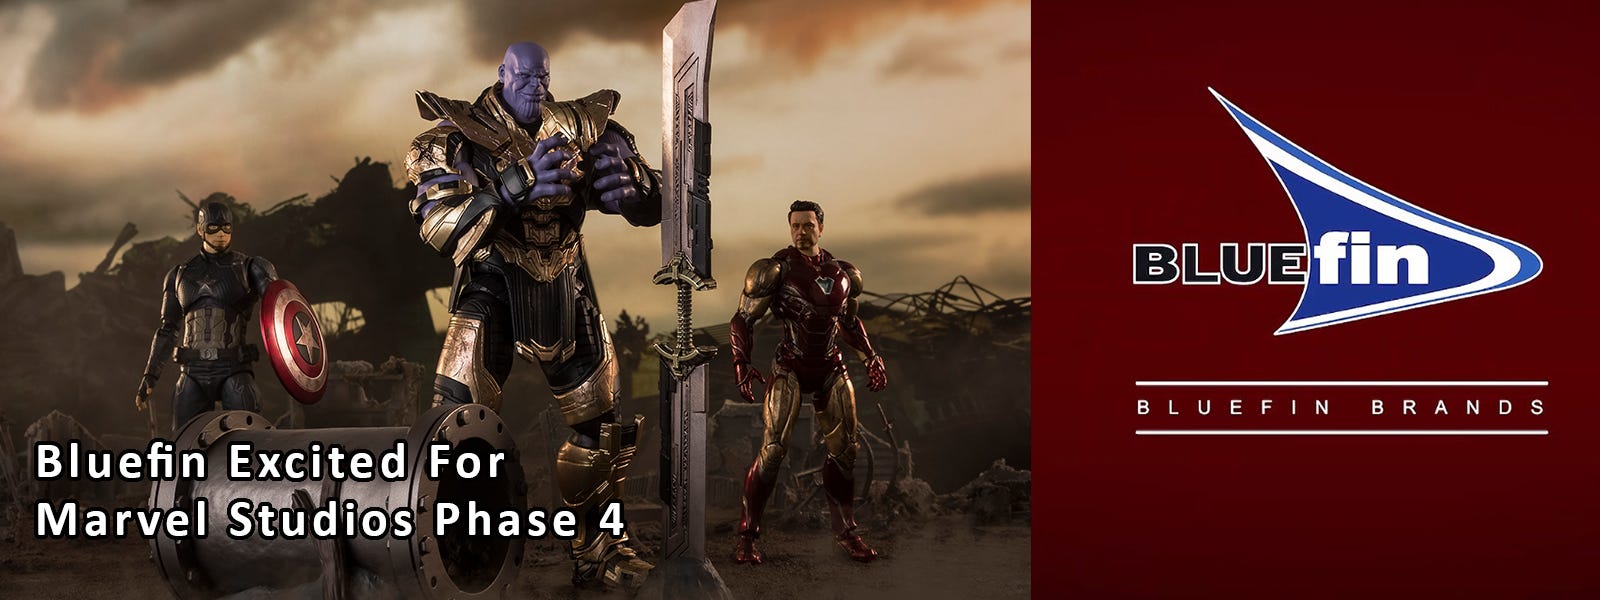 Bluefin Excited For Marvel Studios Phase 4